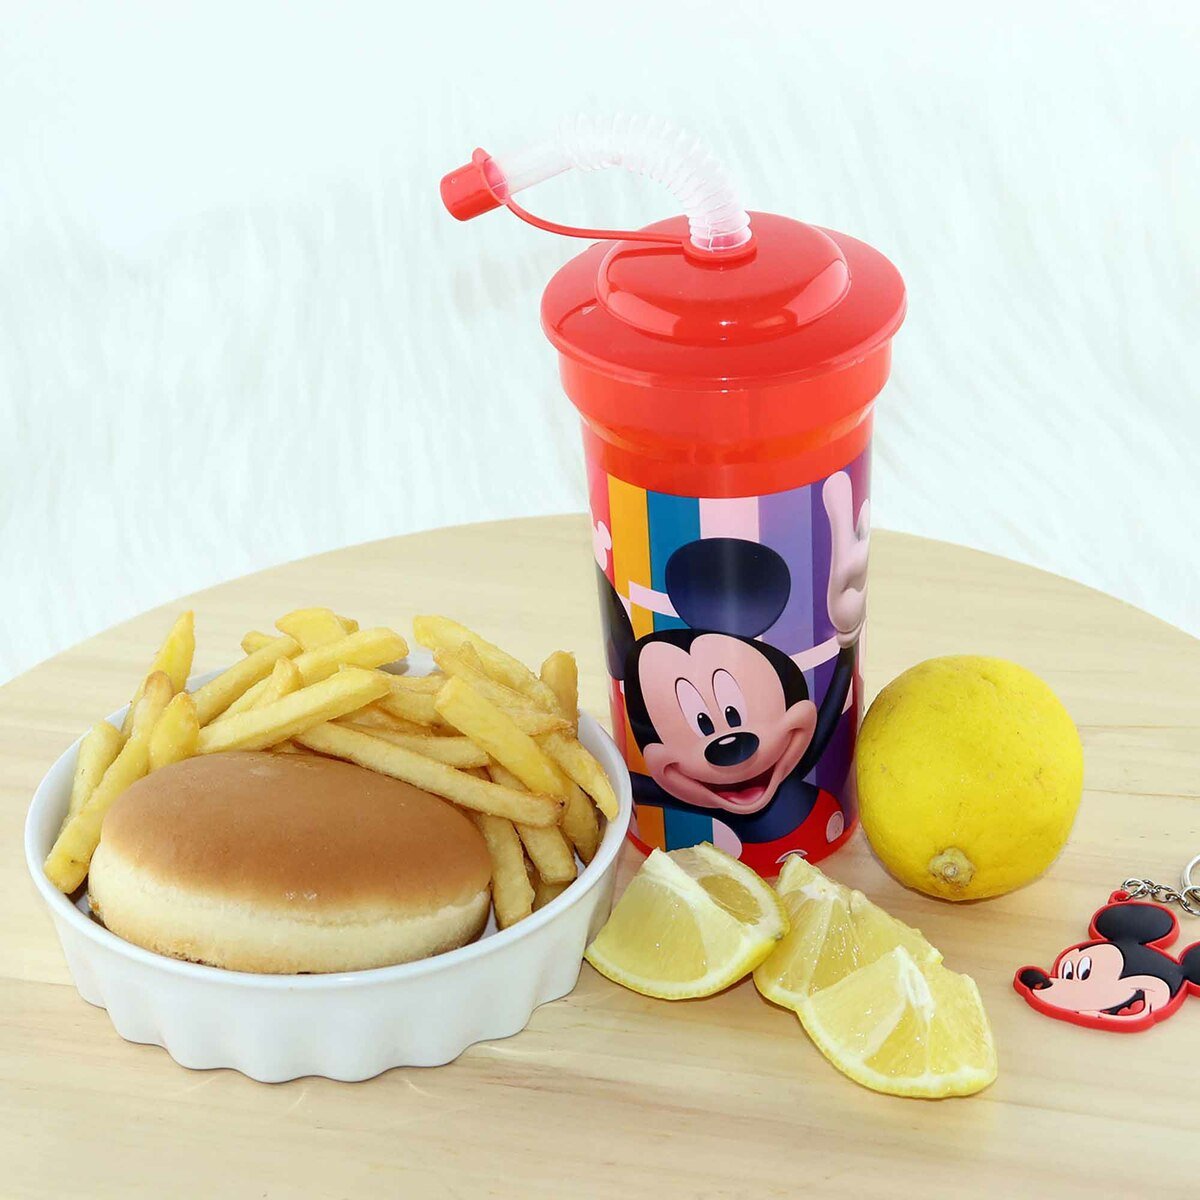 Disney Mickey Mouse Print Cup With Straw & Lid 400ml WD19446C